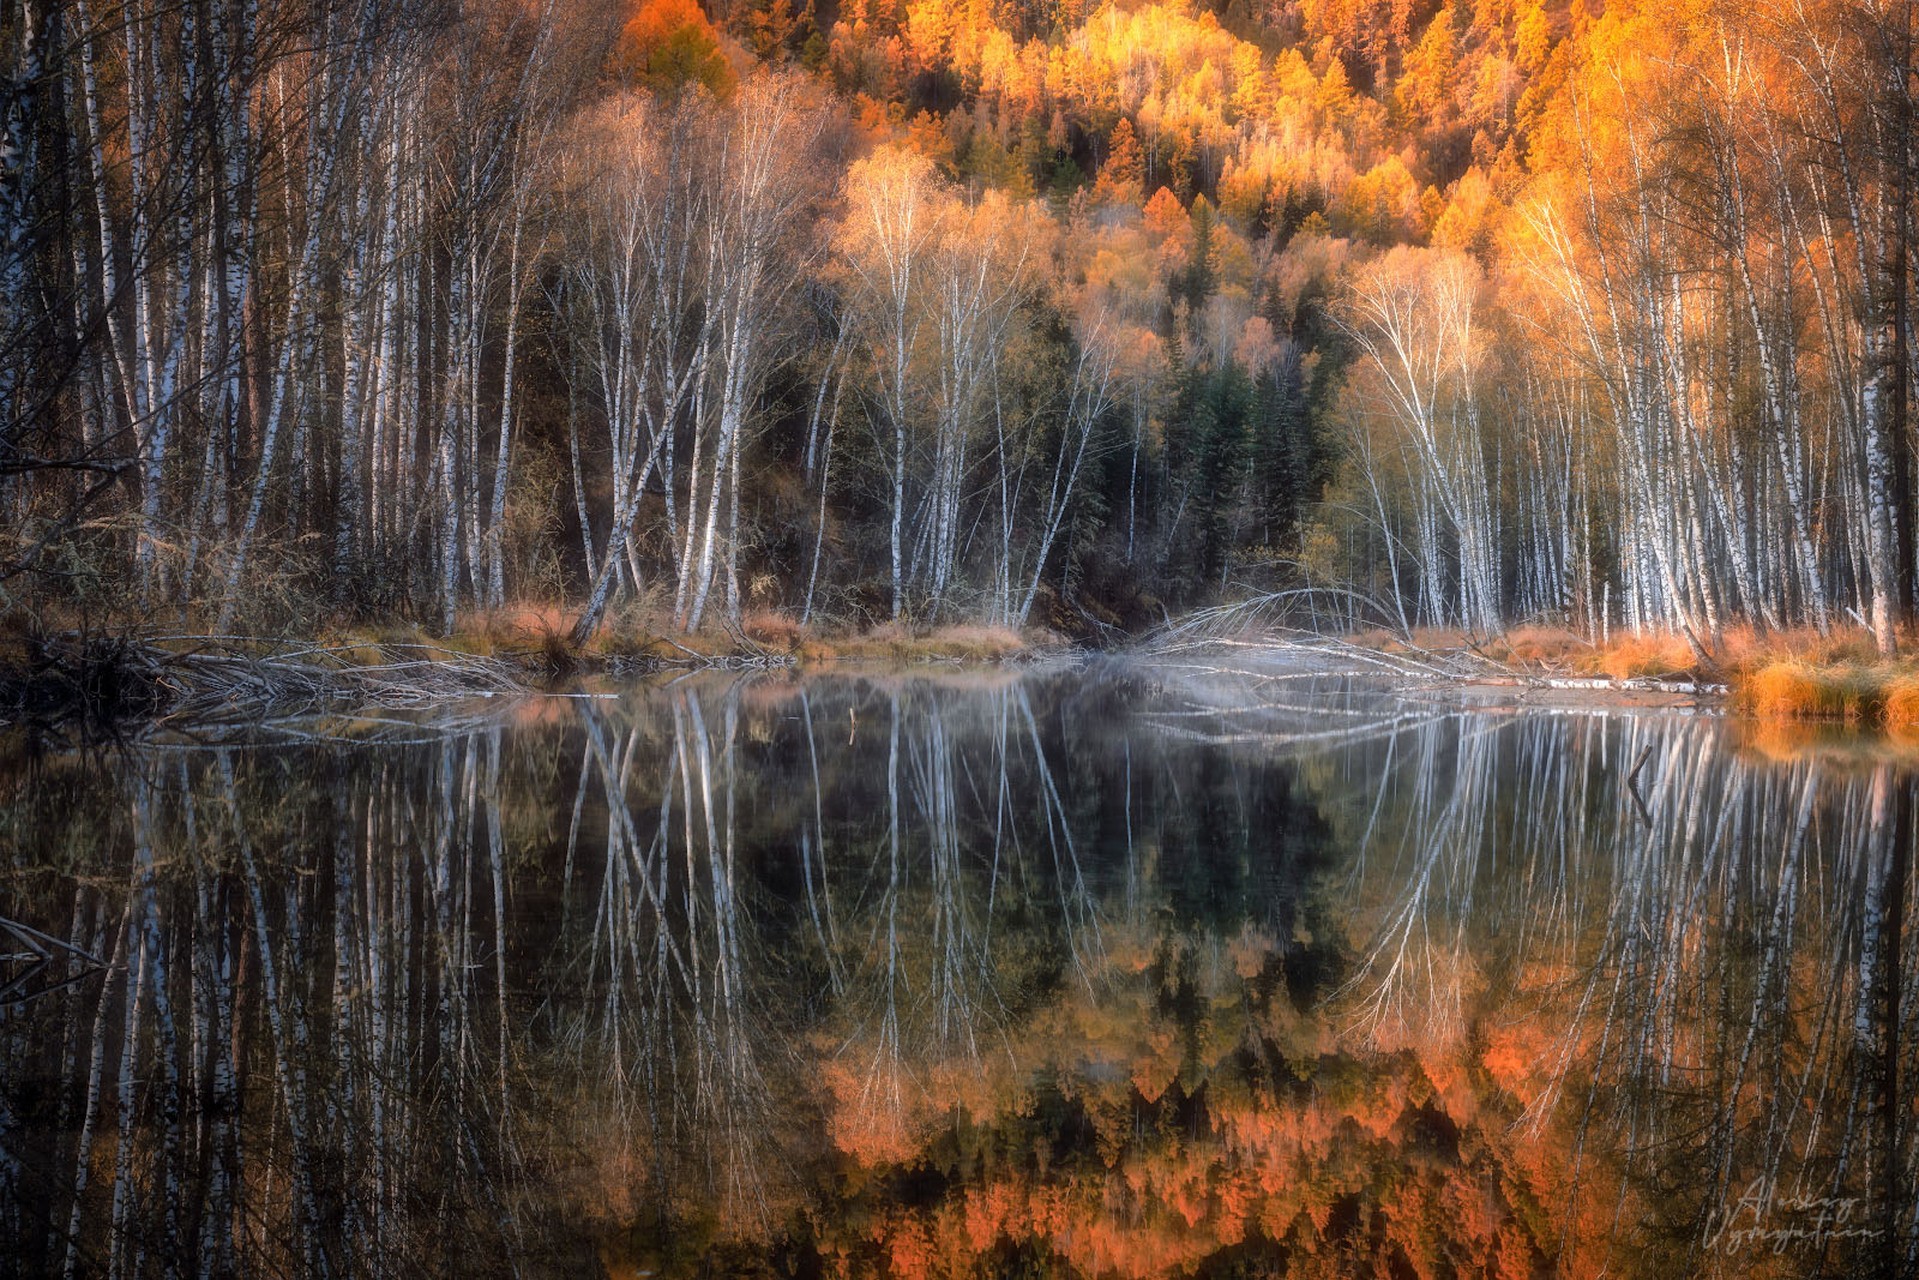 About autumn and reflections